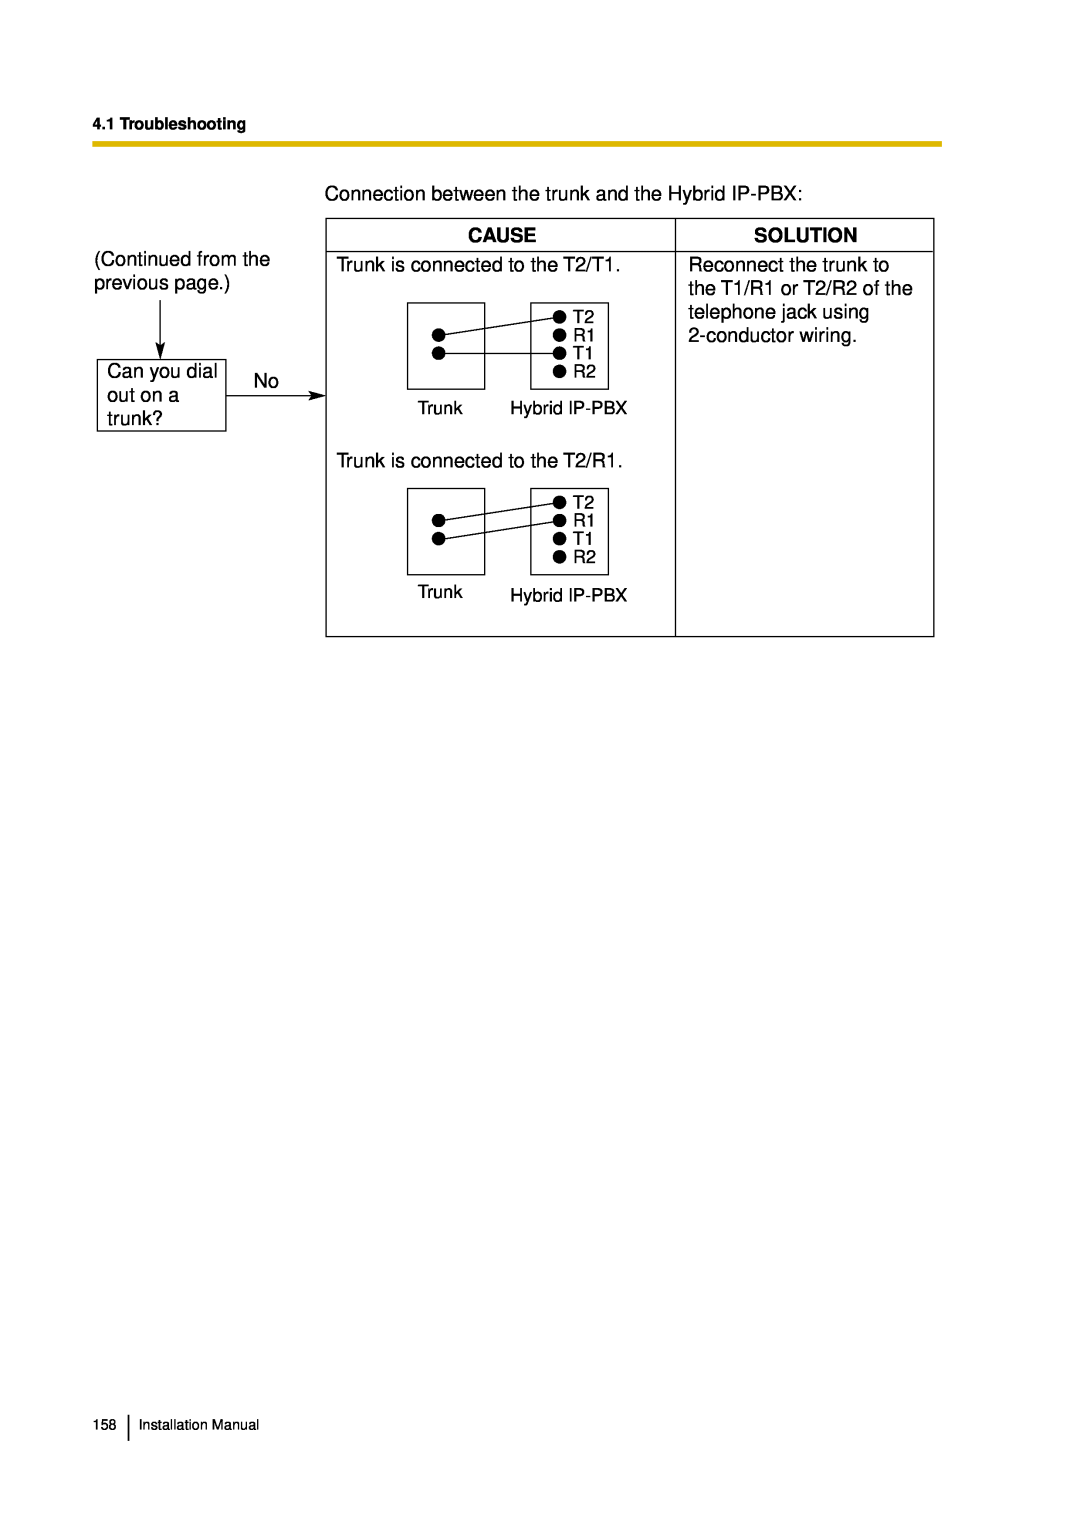 Panasonic KX-TDA30 installation manual Continued from the previous page 